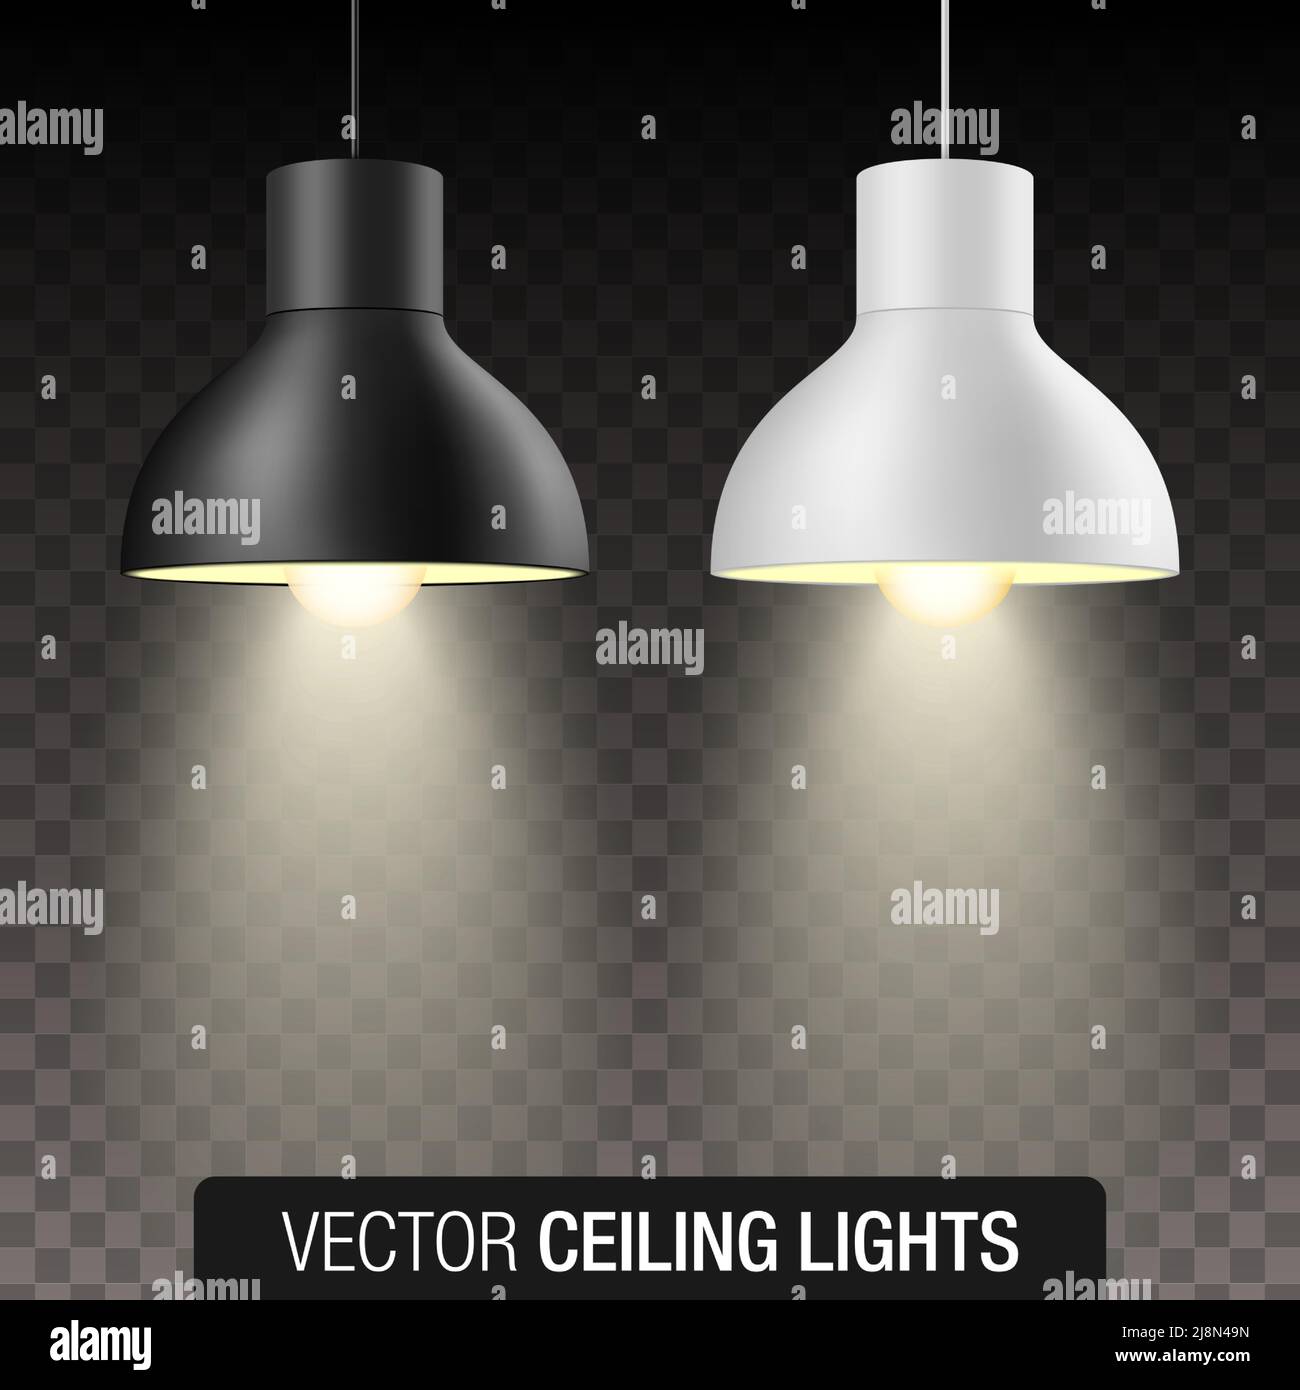 Vector set of black and white turned on pendant ceiling light shades, isolated on transparent background. Stock Vector